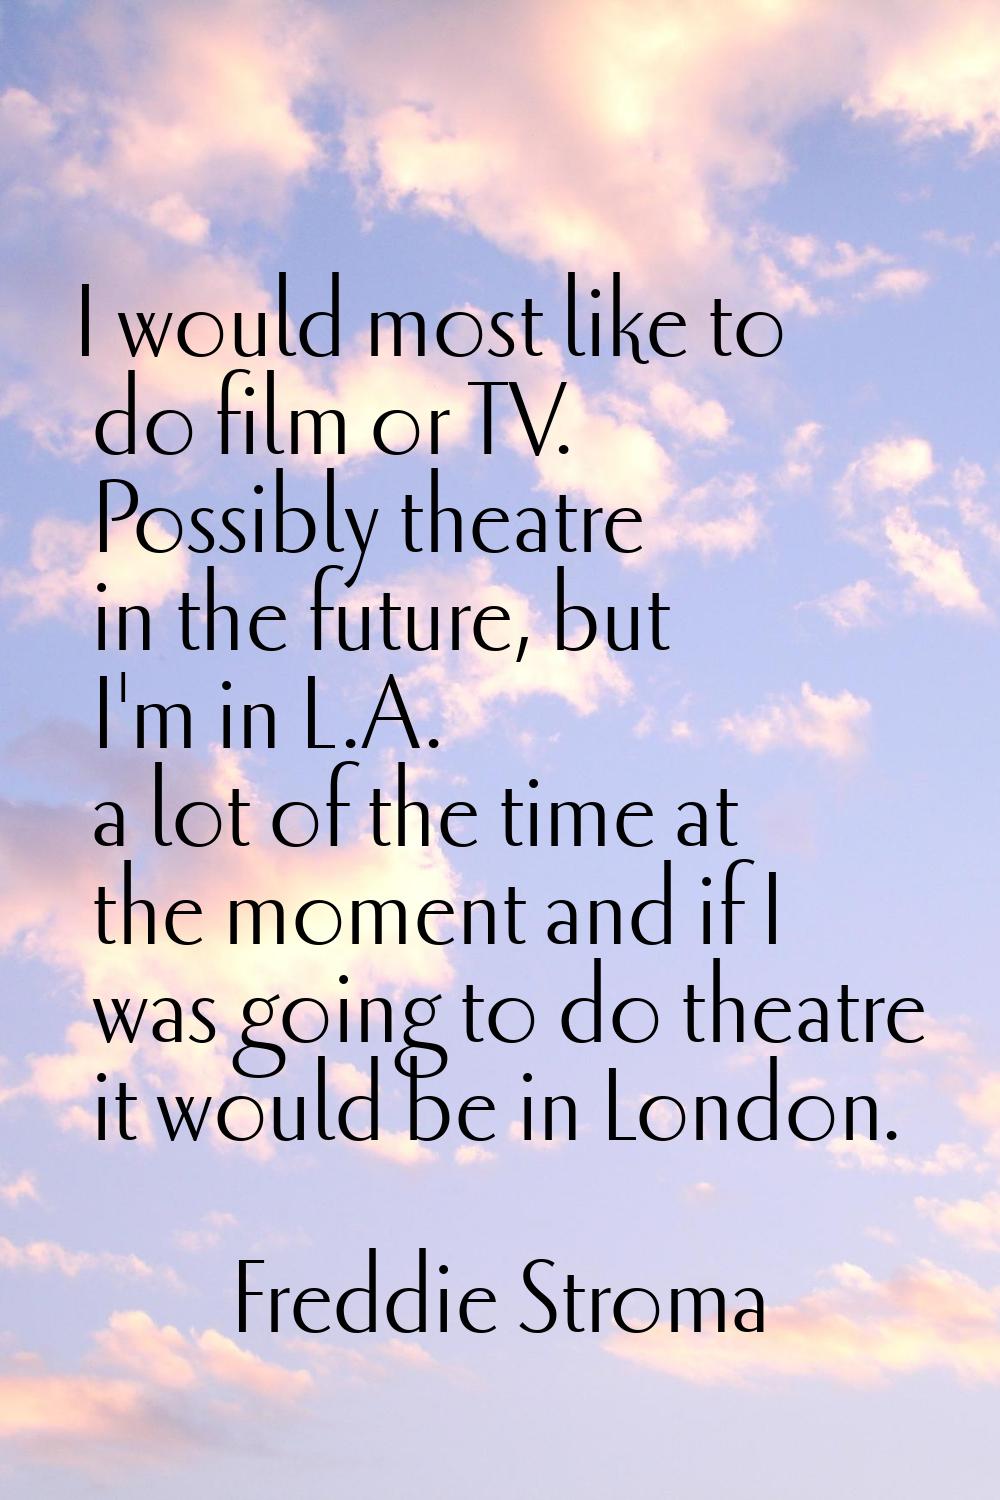 I would most like to do film or TV. Possibly theatre in the future, but I'm in L.A. a lot of the ti